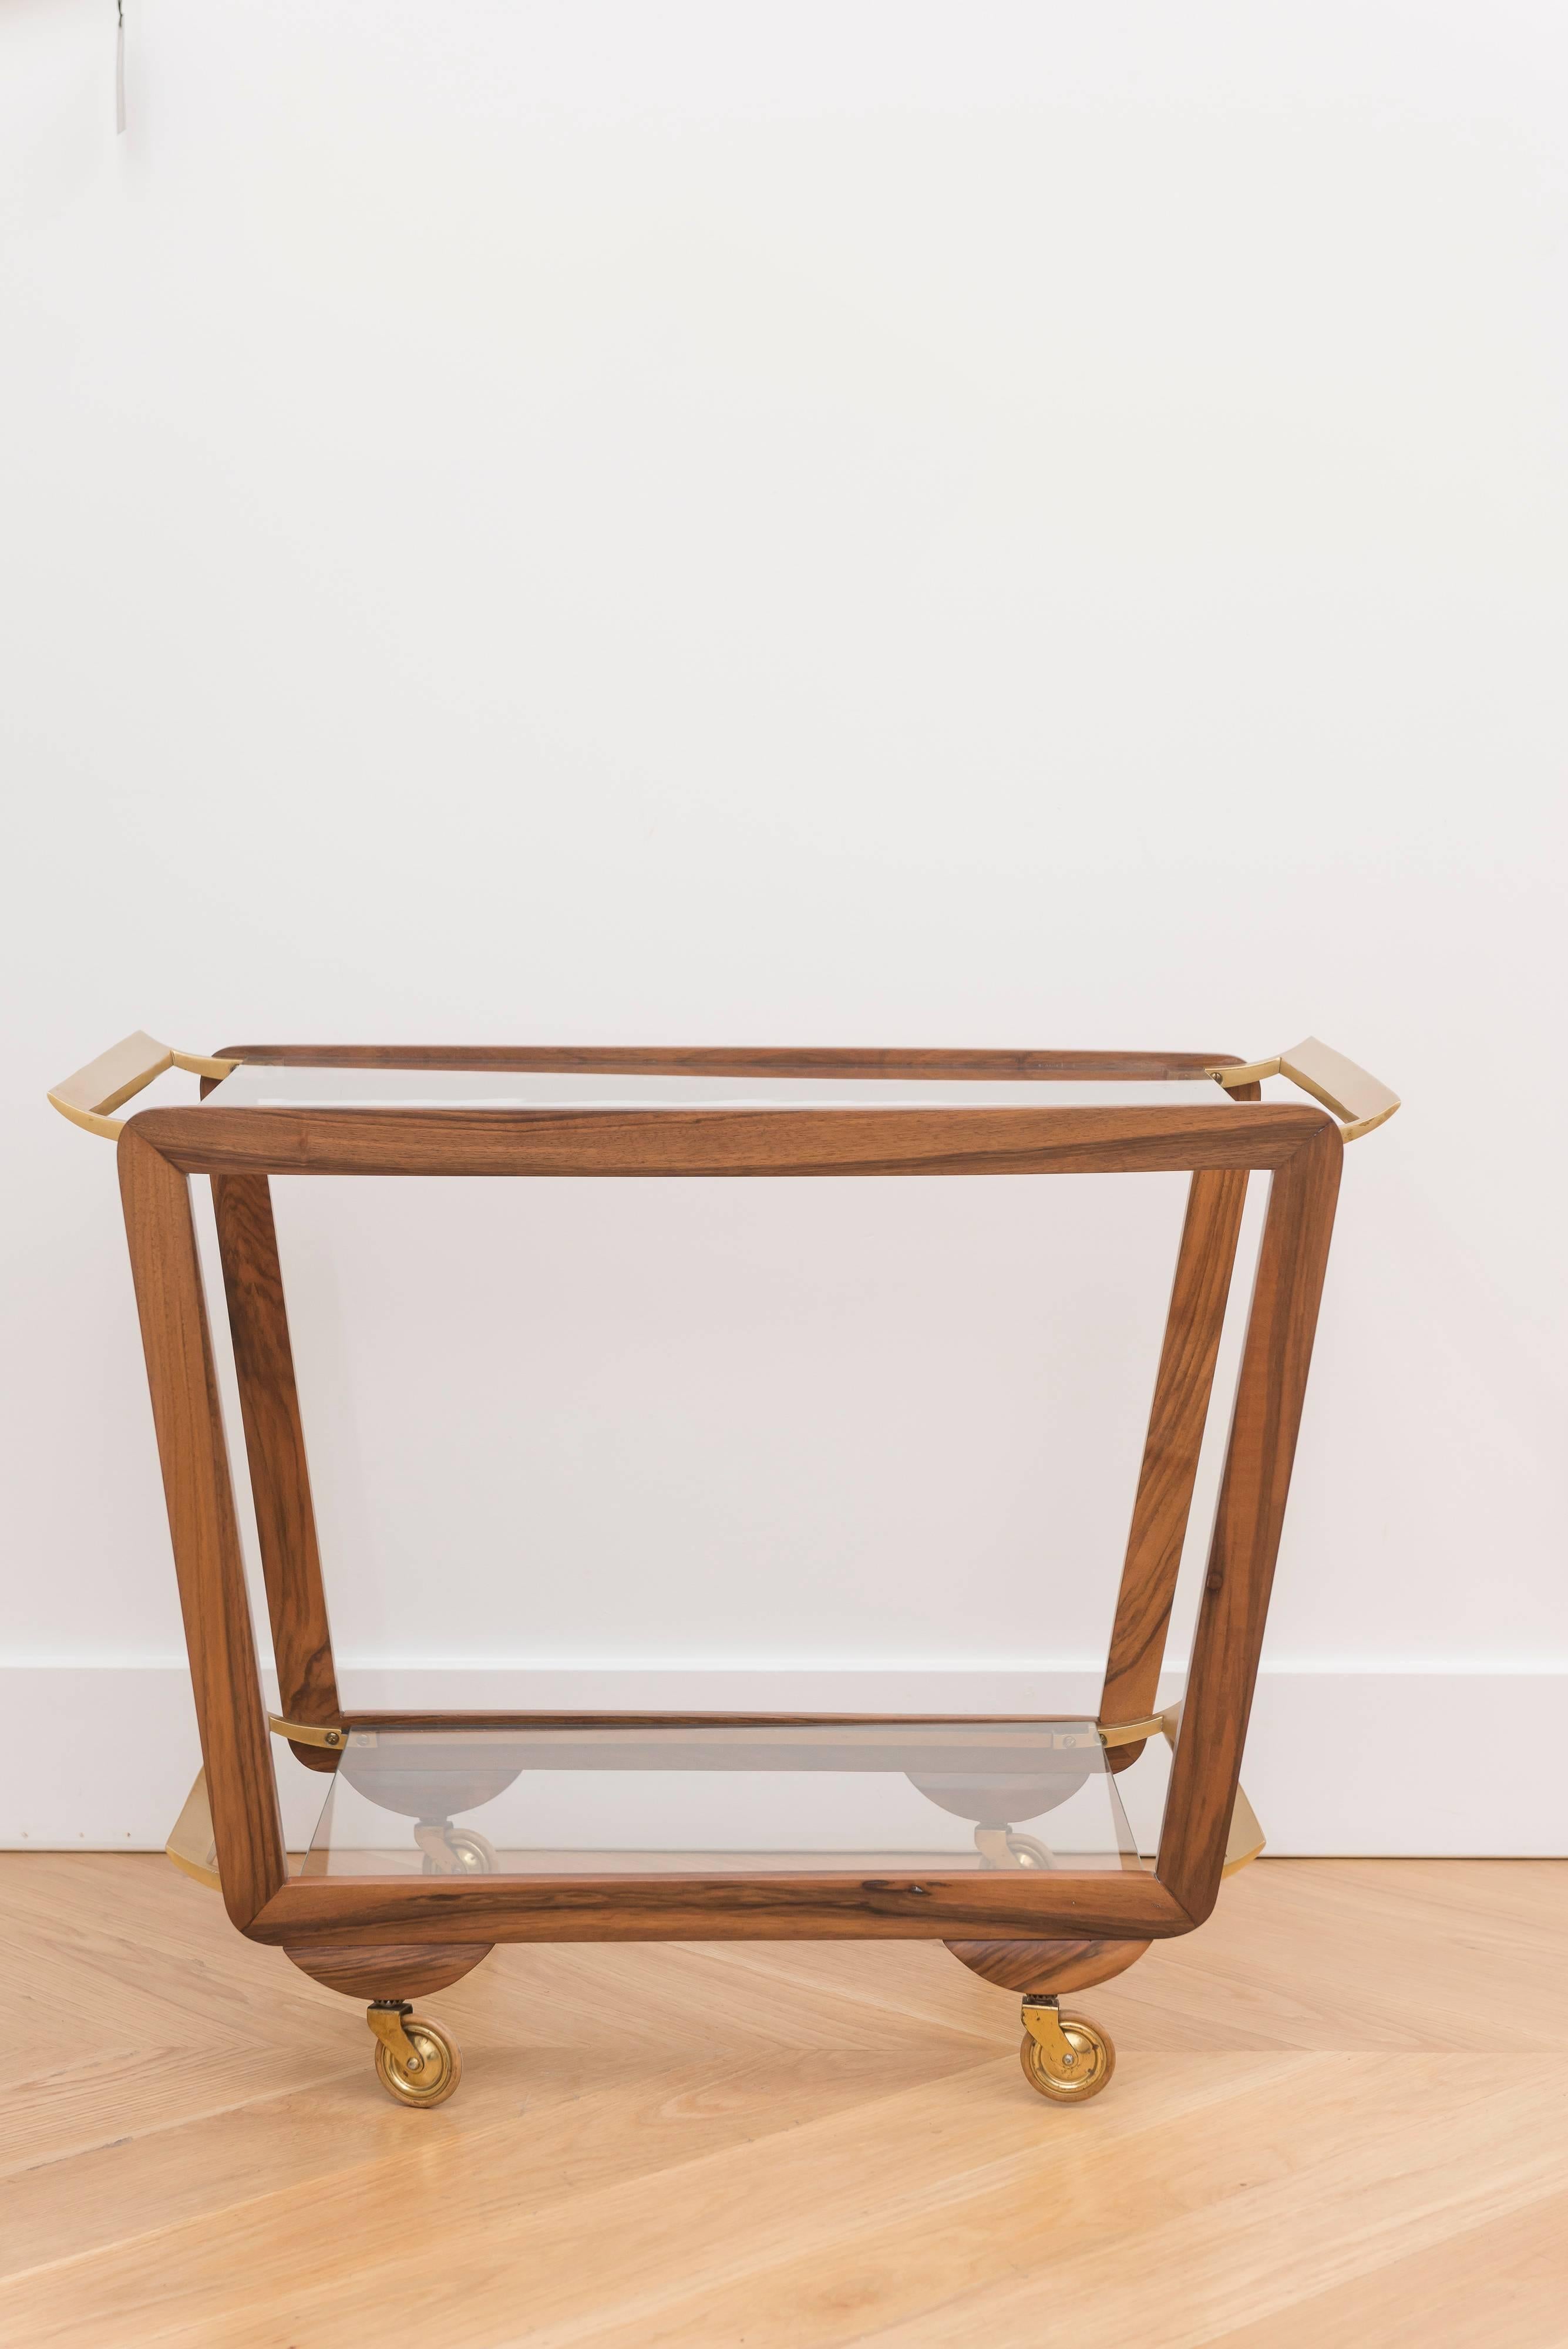 Walnut and brass plate bar cart, completely restored.